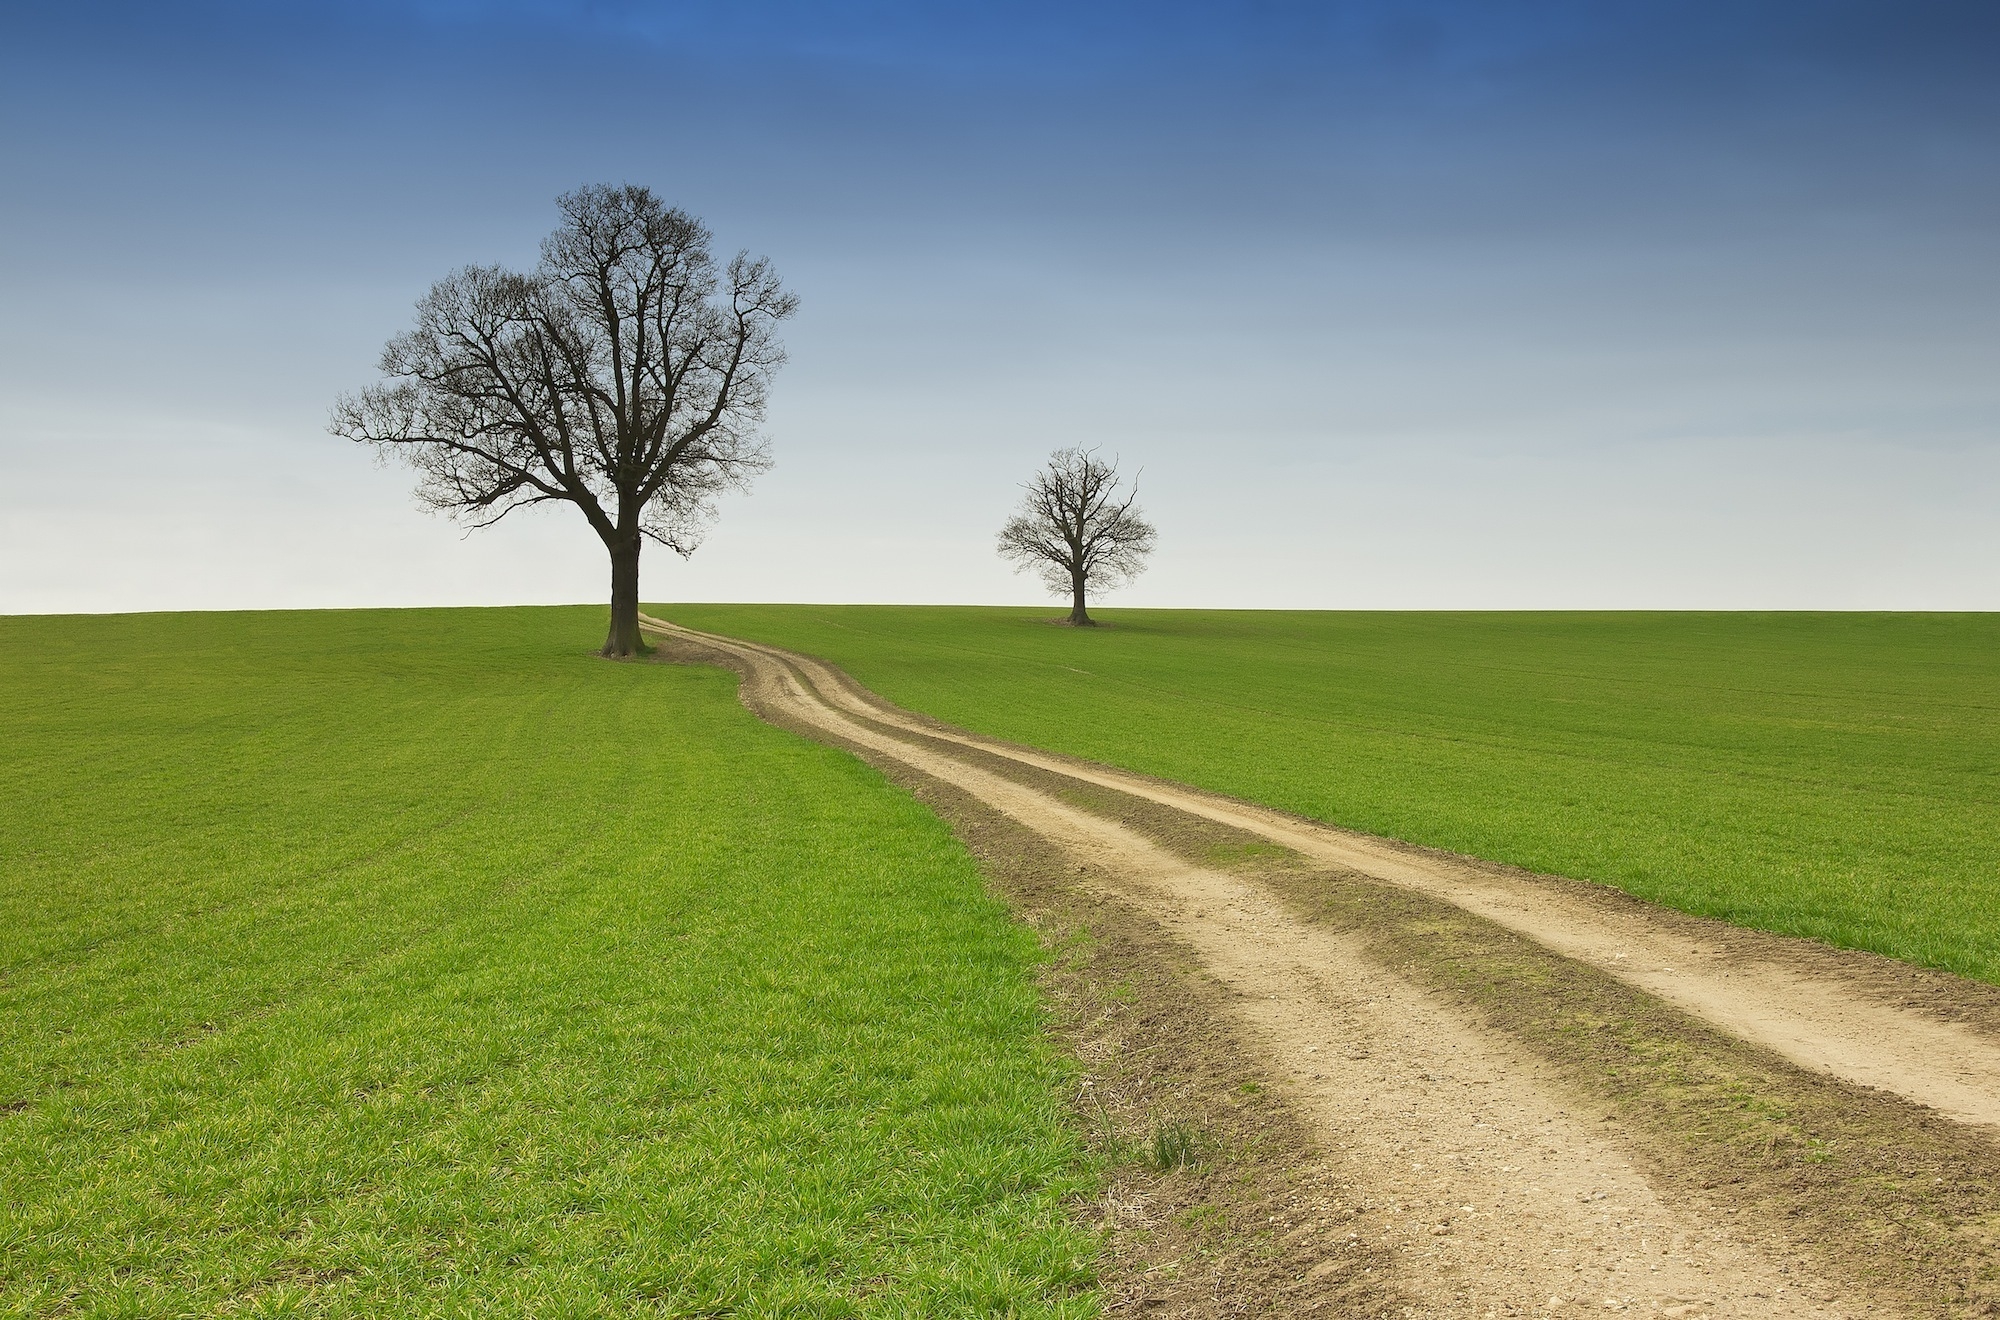 1920x1080 Background trees, nature, road, summer, field, country, emptiness, void, countryside